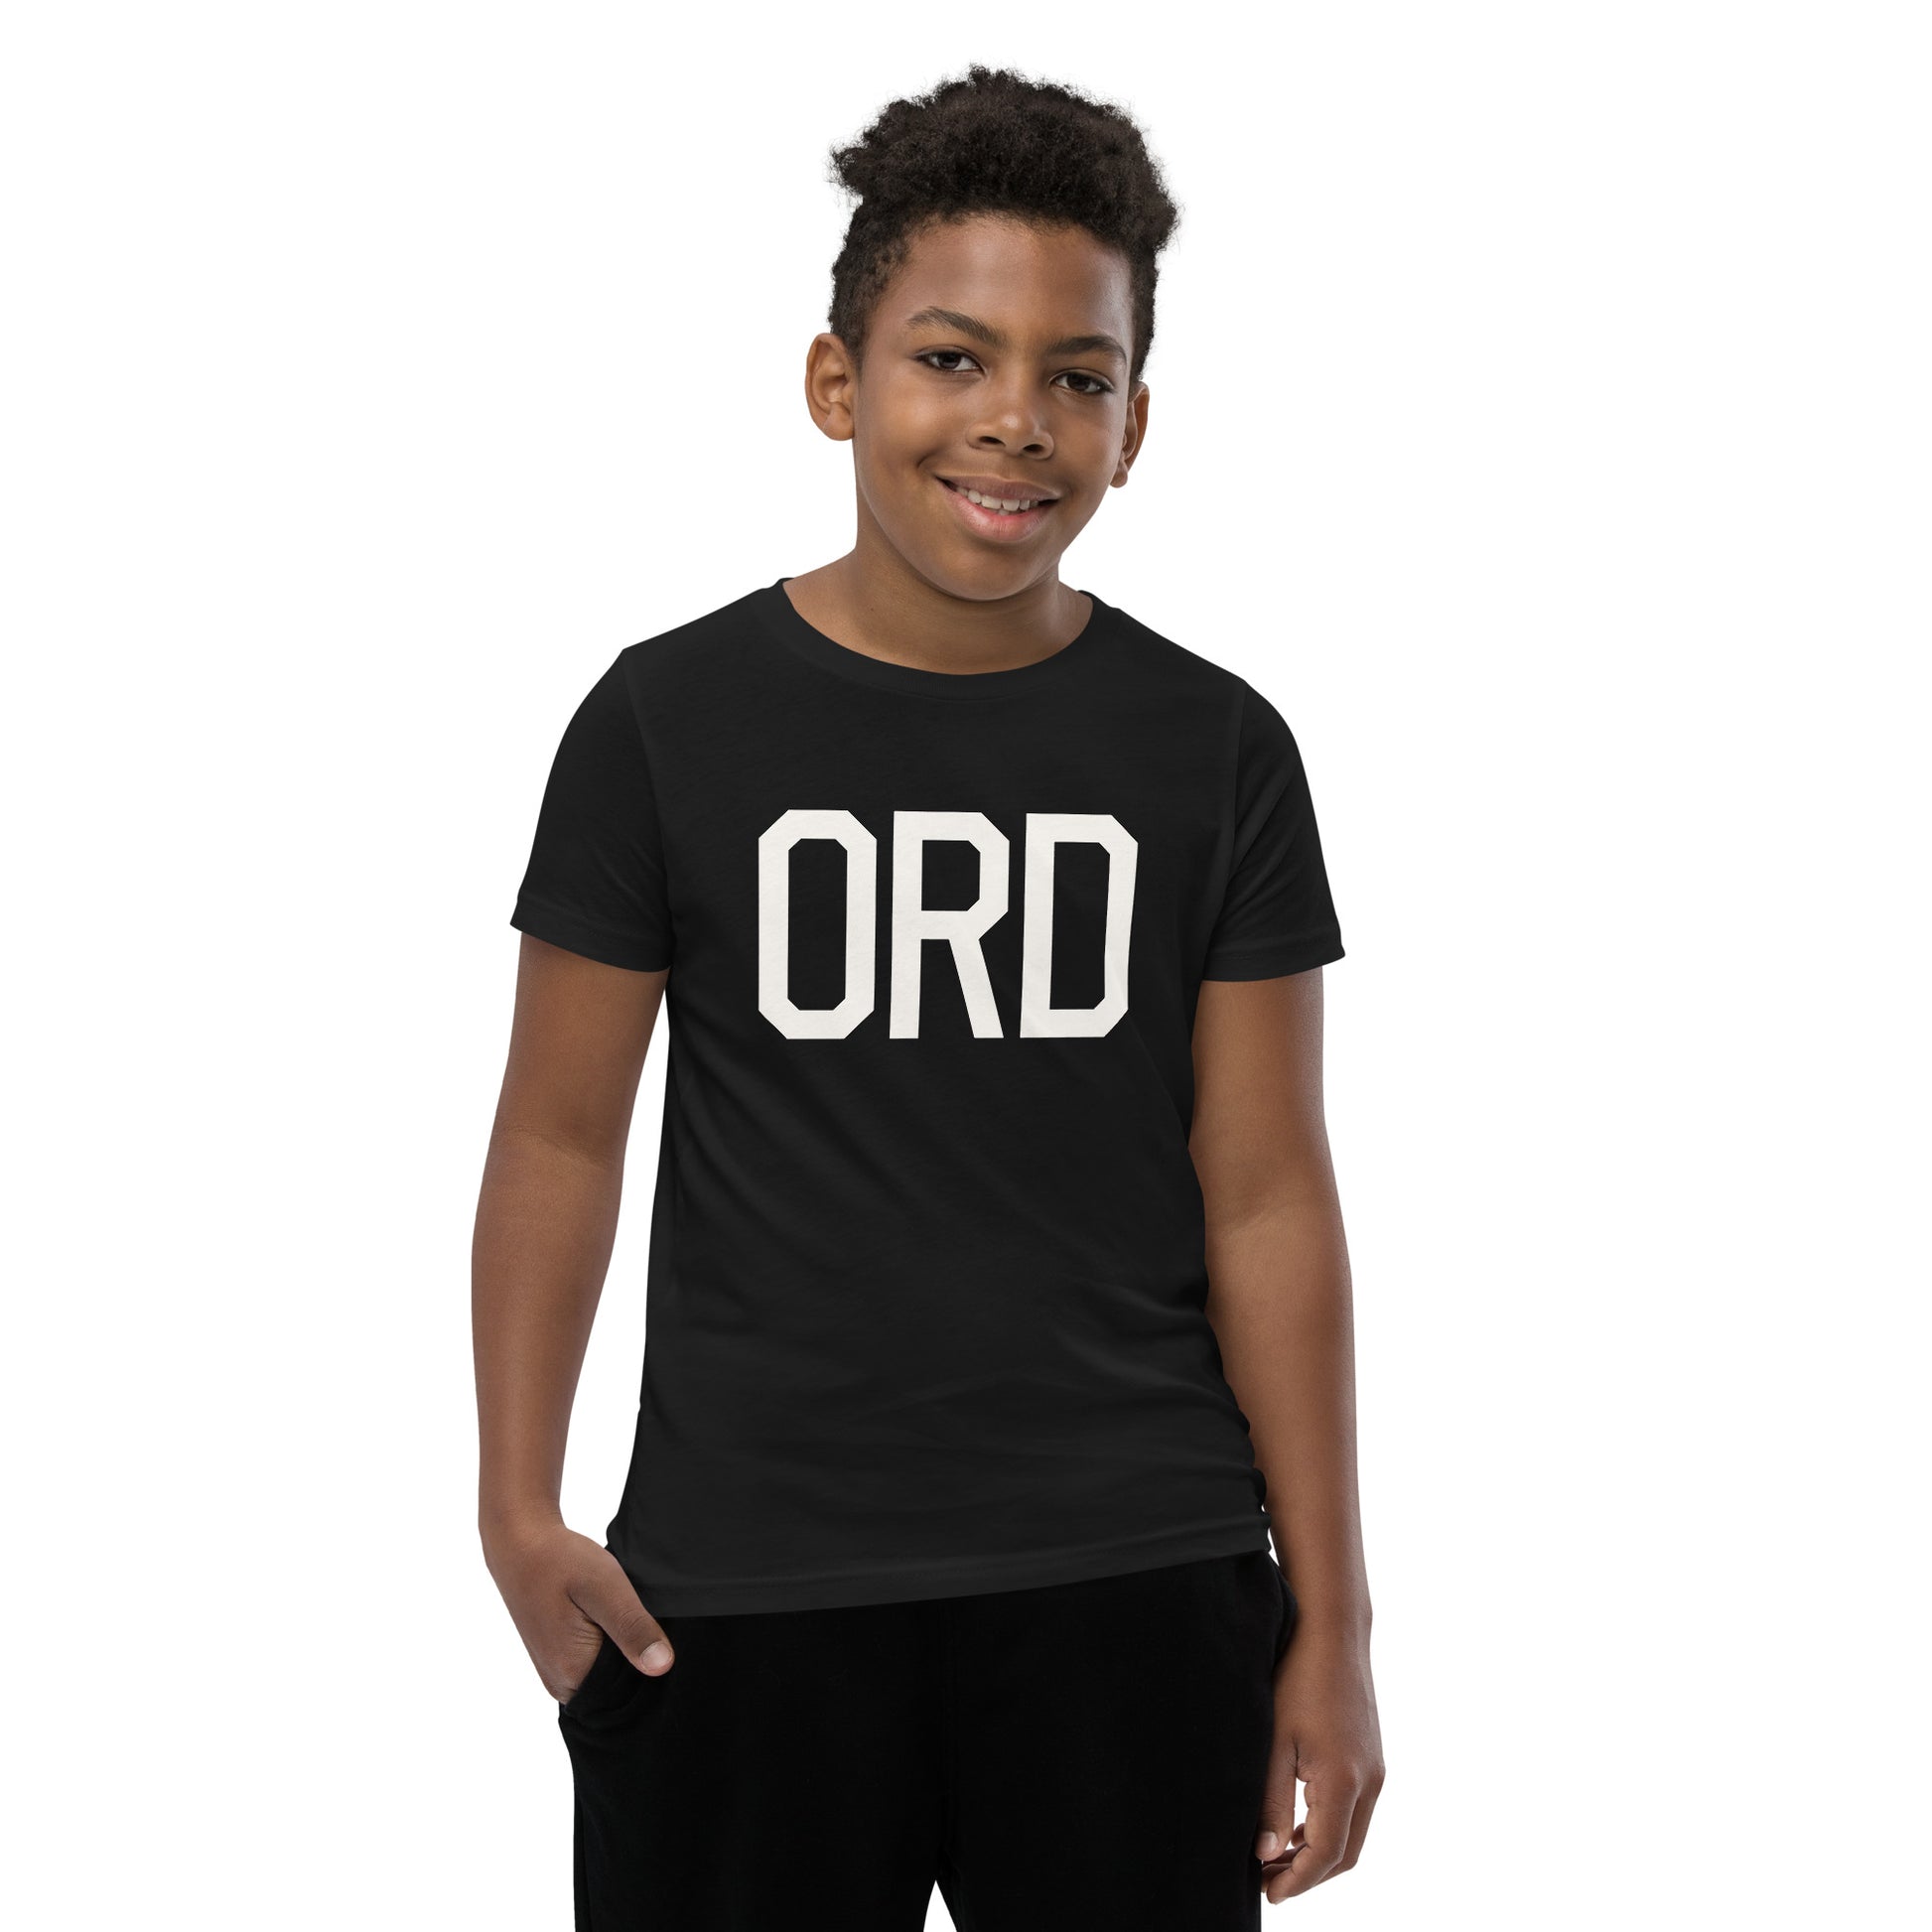 Kid's T-Shirt - White Graphic • ORD Chicago • YHM Designs - Image 06